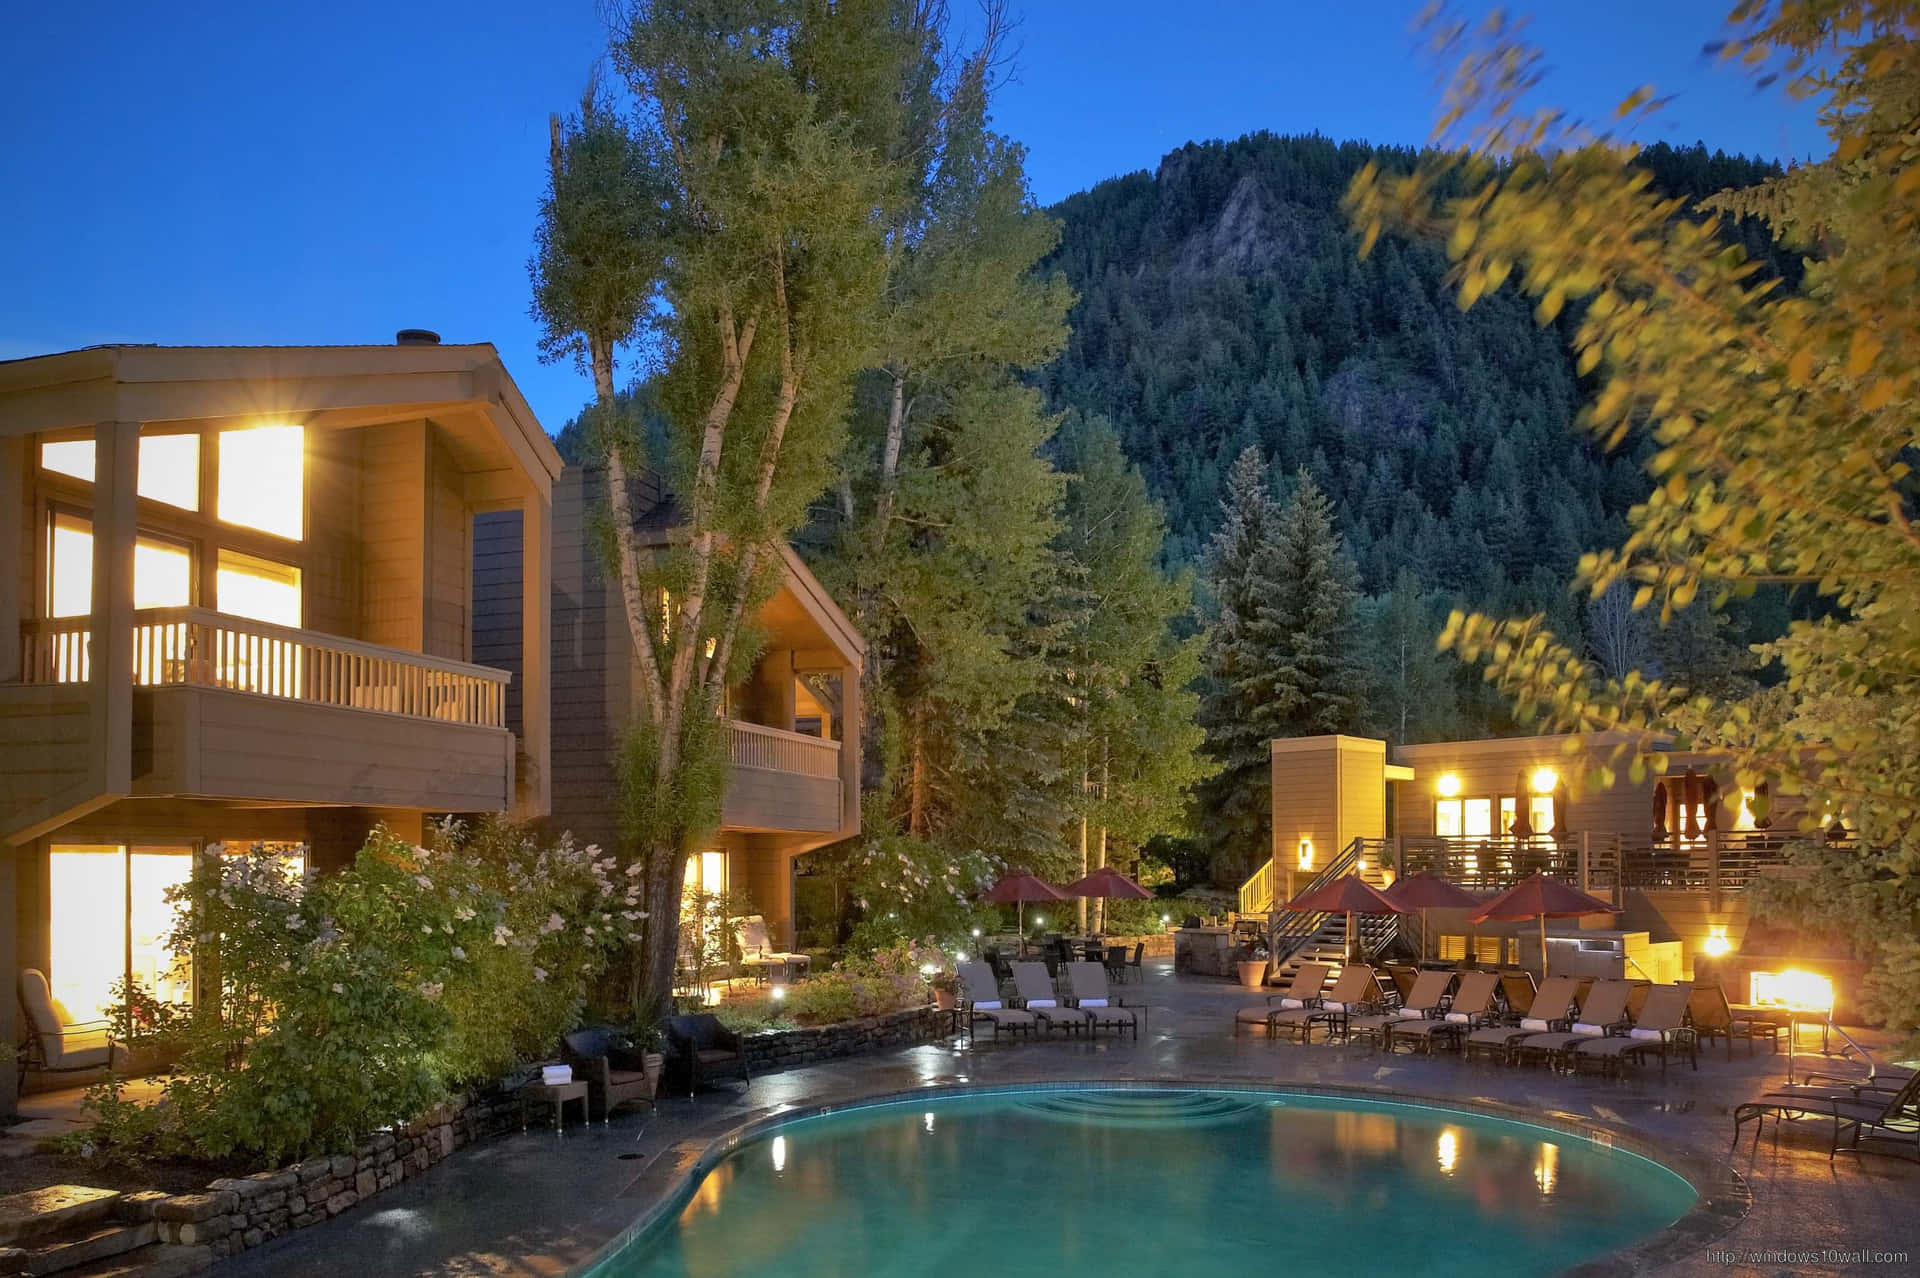 Take in the breathtaking mountains and forests of Aspen, Colorado